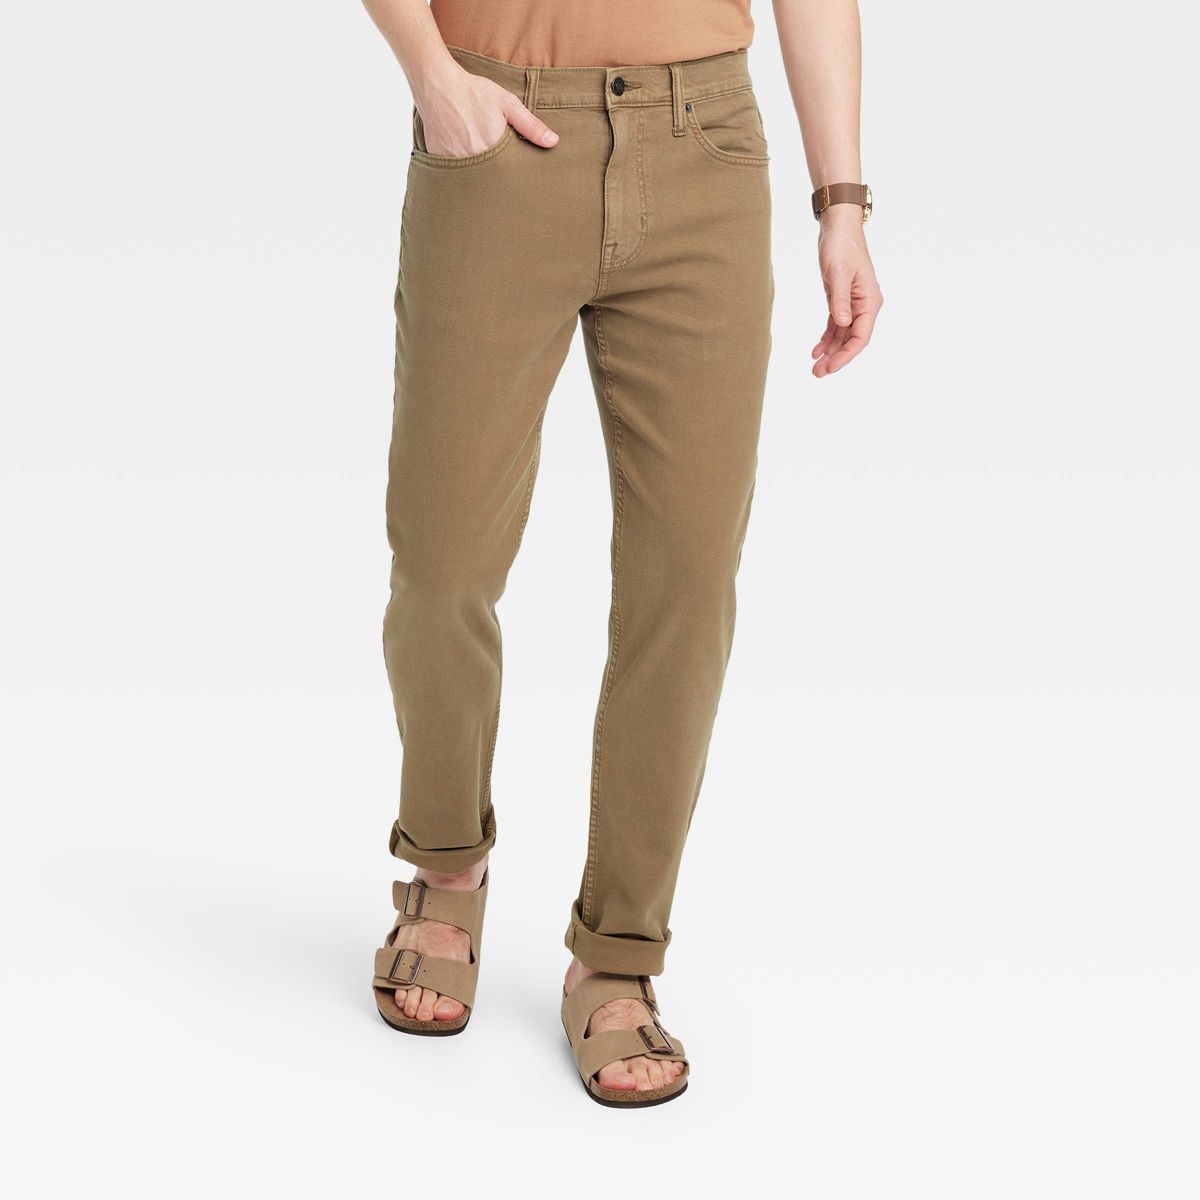 Men's Lightweight Colored Slim Fit Jeans - Goodfellow & Co™ | Target